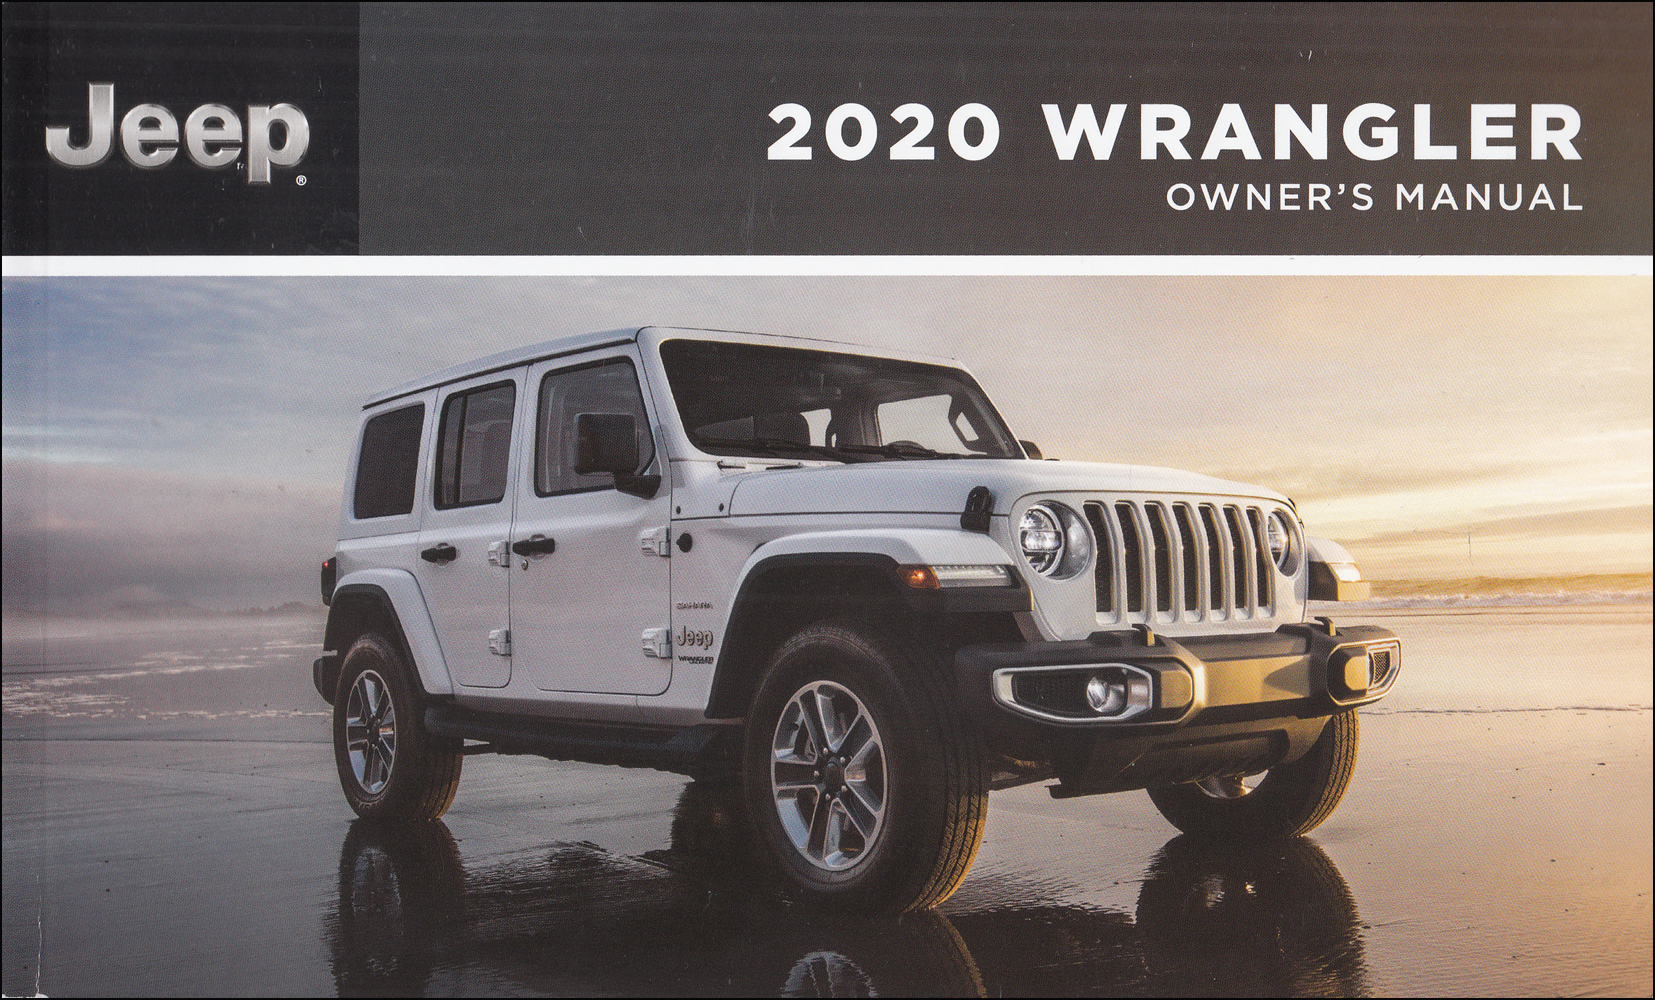 2020 Jeep Wrangler Owner's Manual Original Extended 482-page version